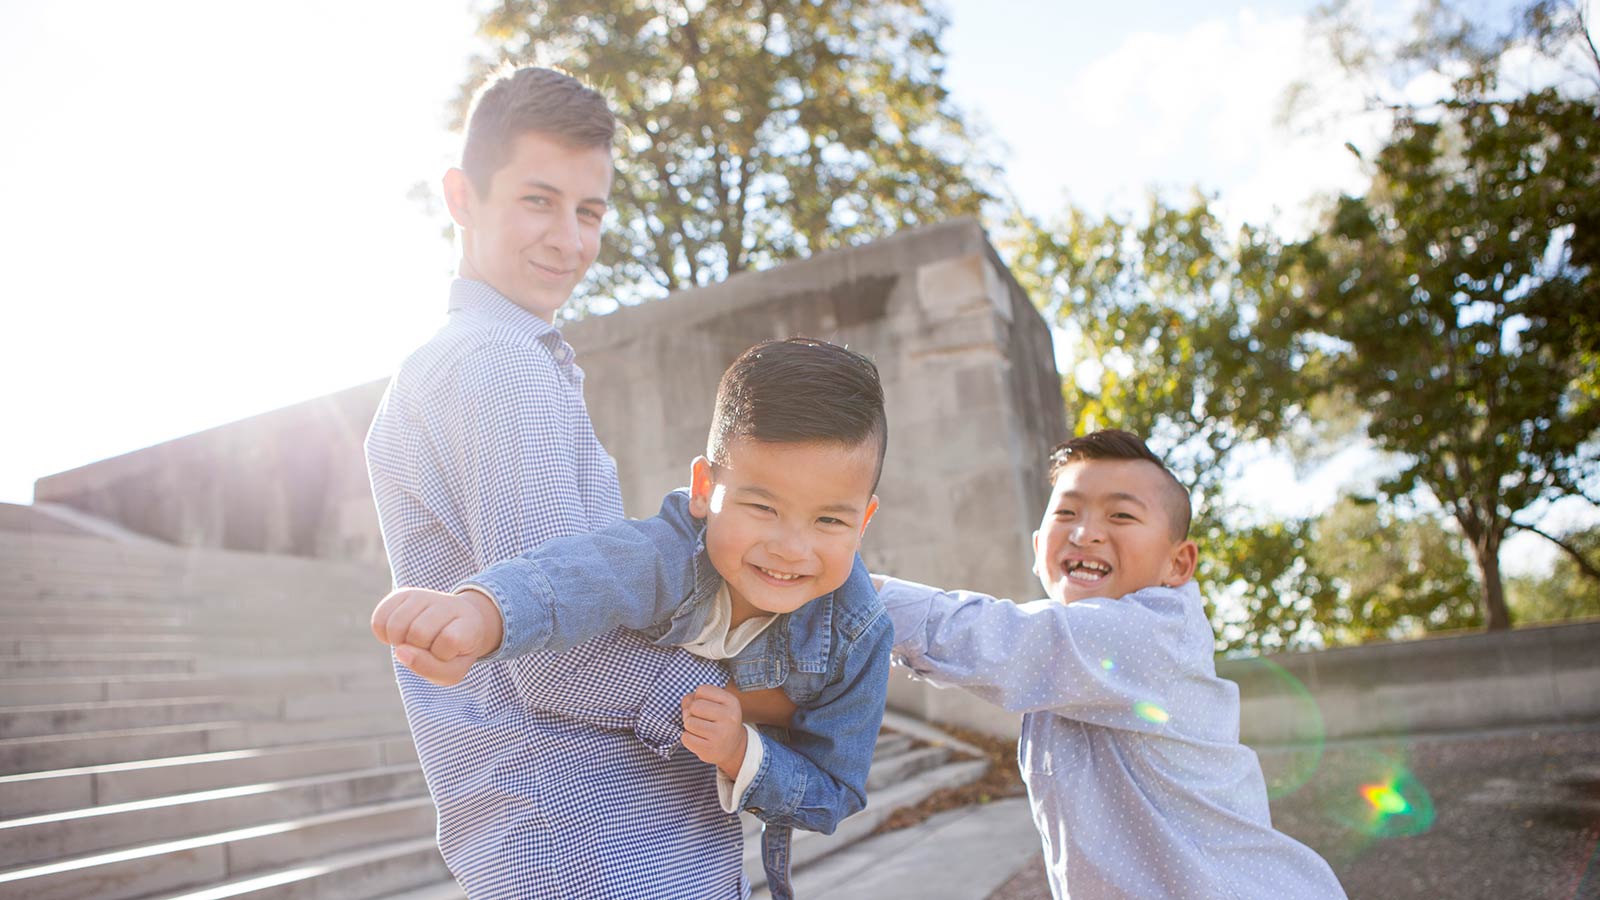 older brother holding younger brother adopted from china making superman fist while other brother laughs